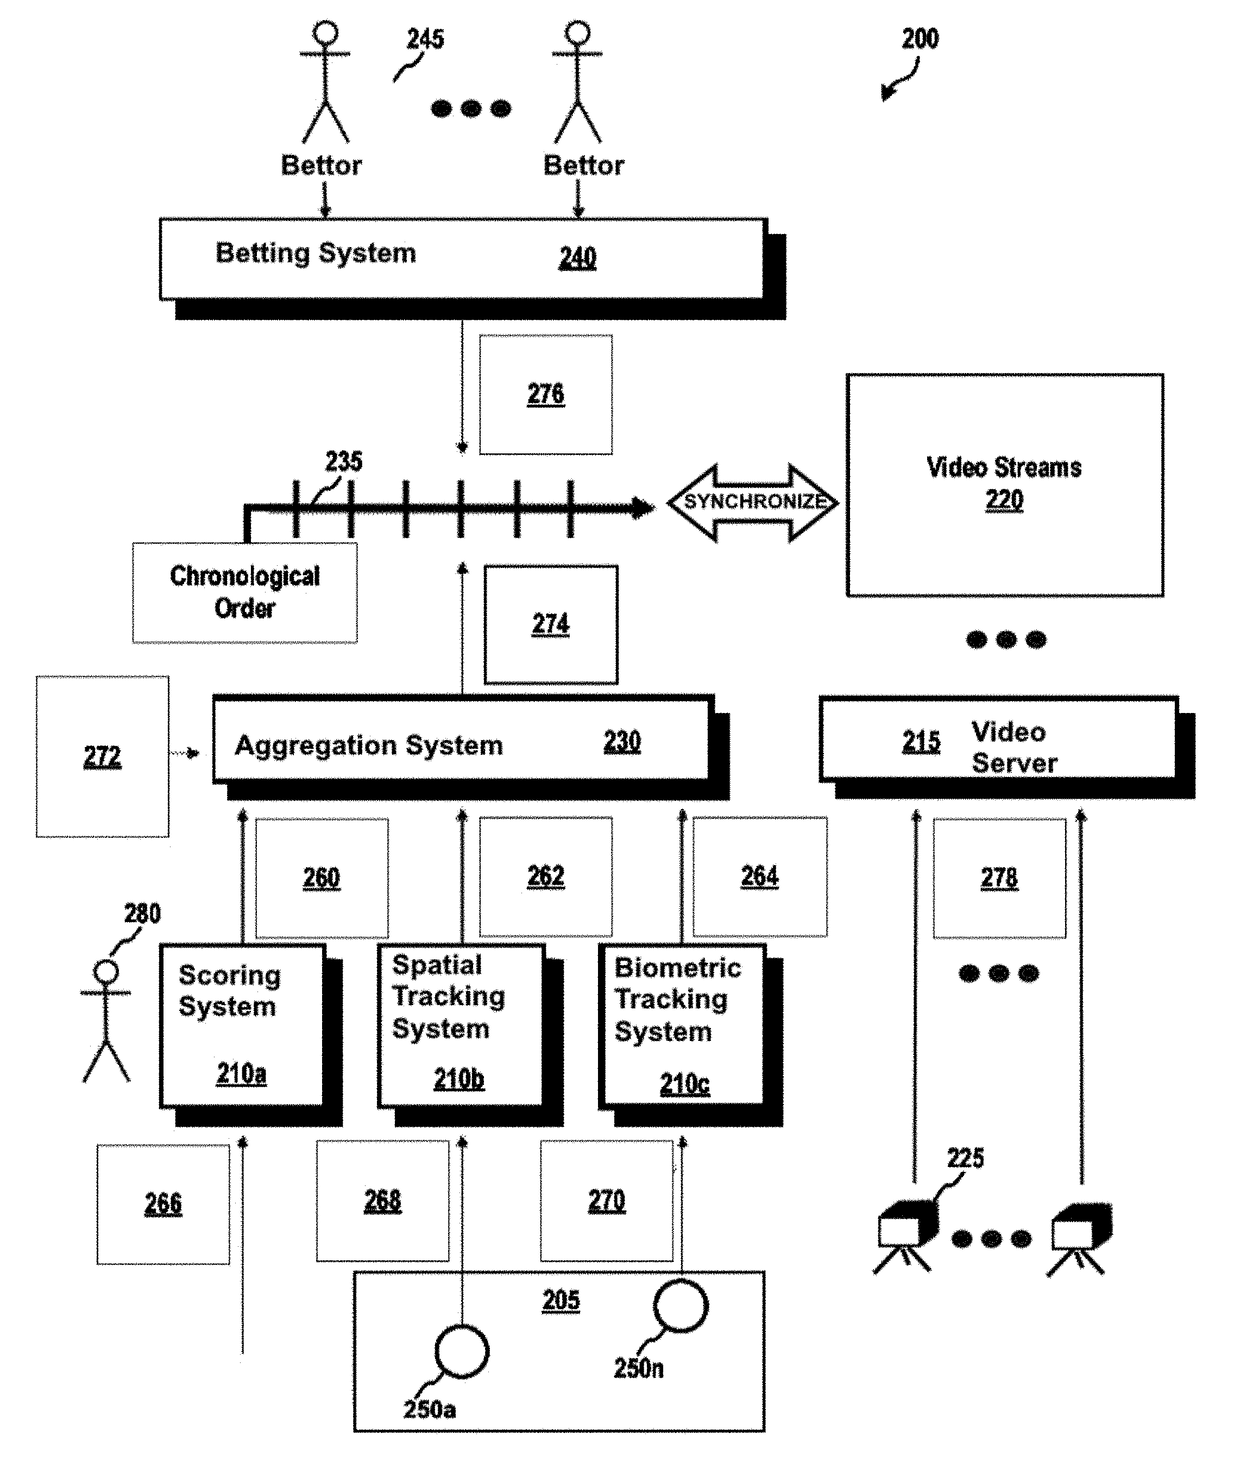 Systems and methods for providing secure data for wagering for live sports events